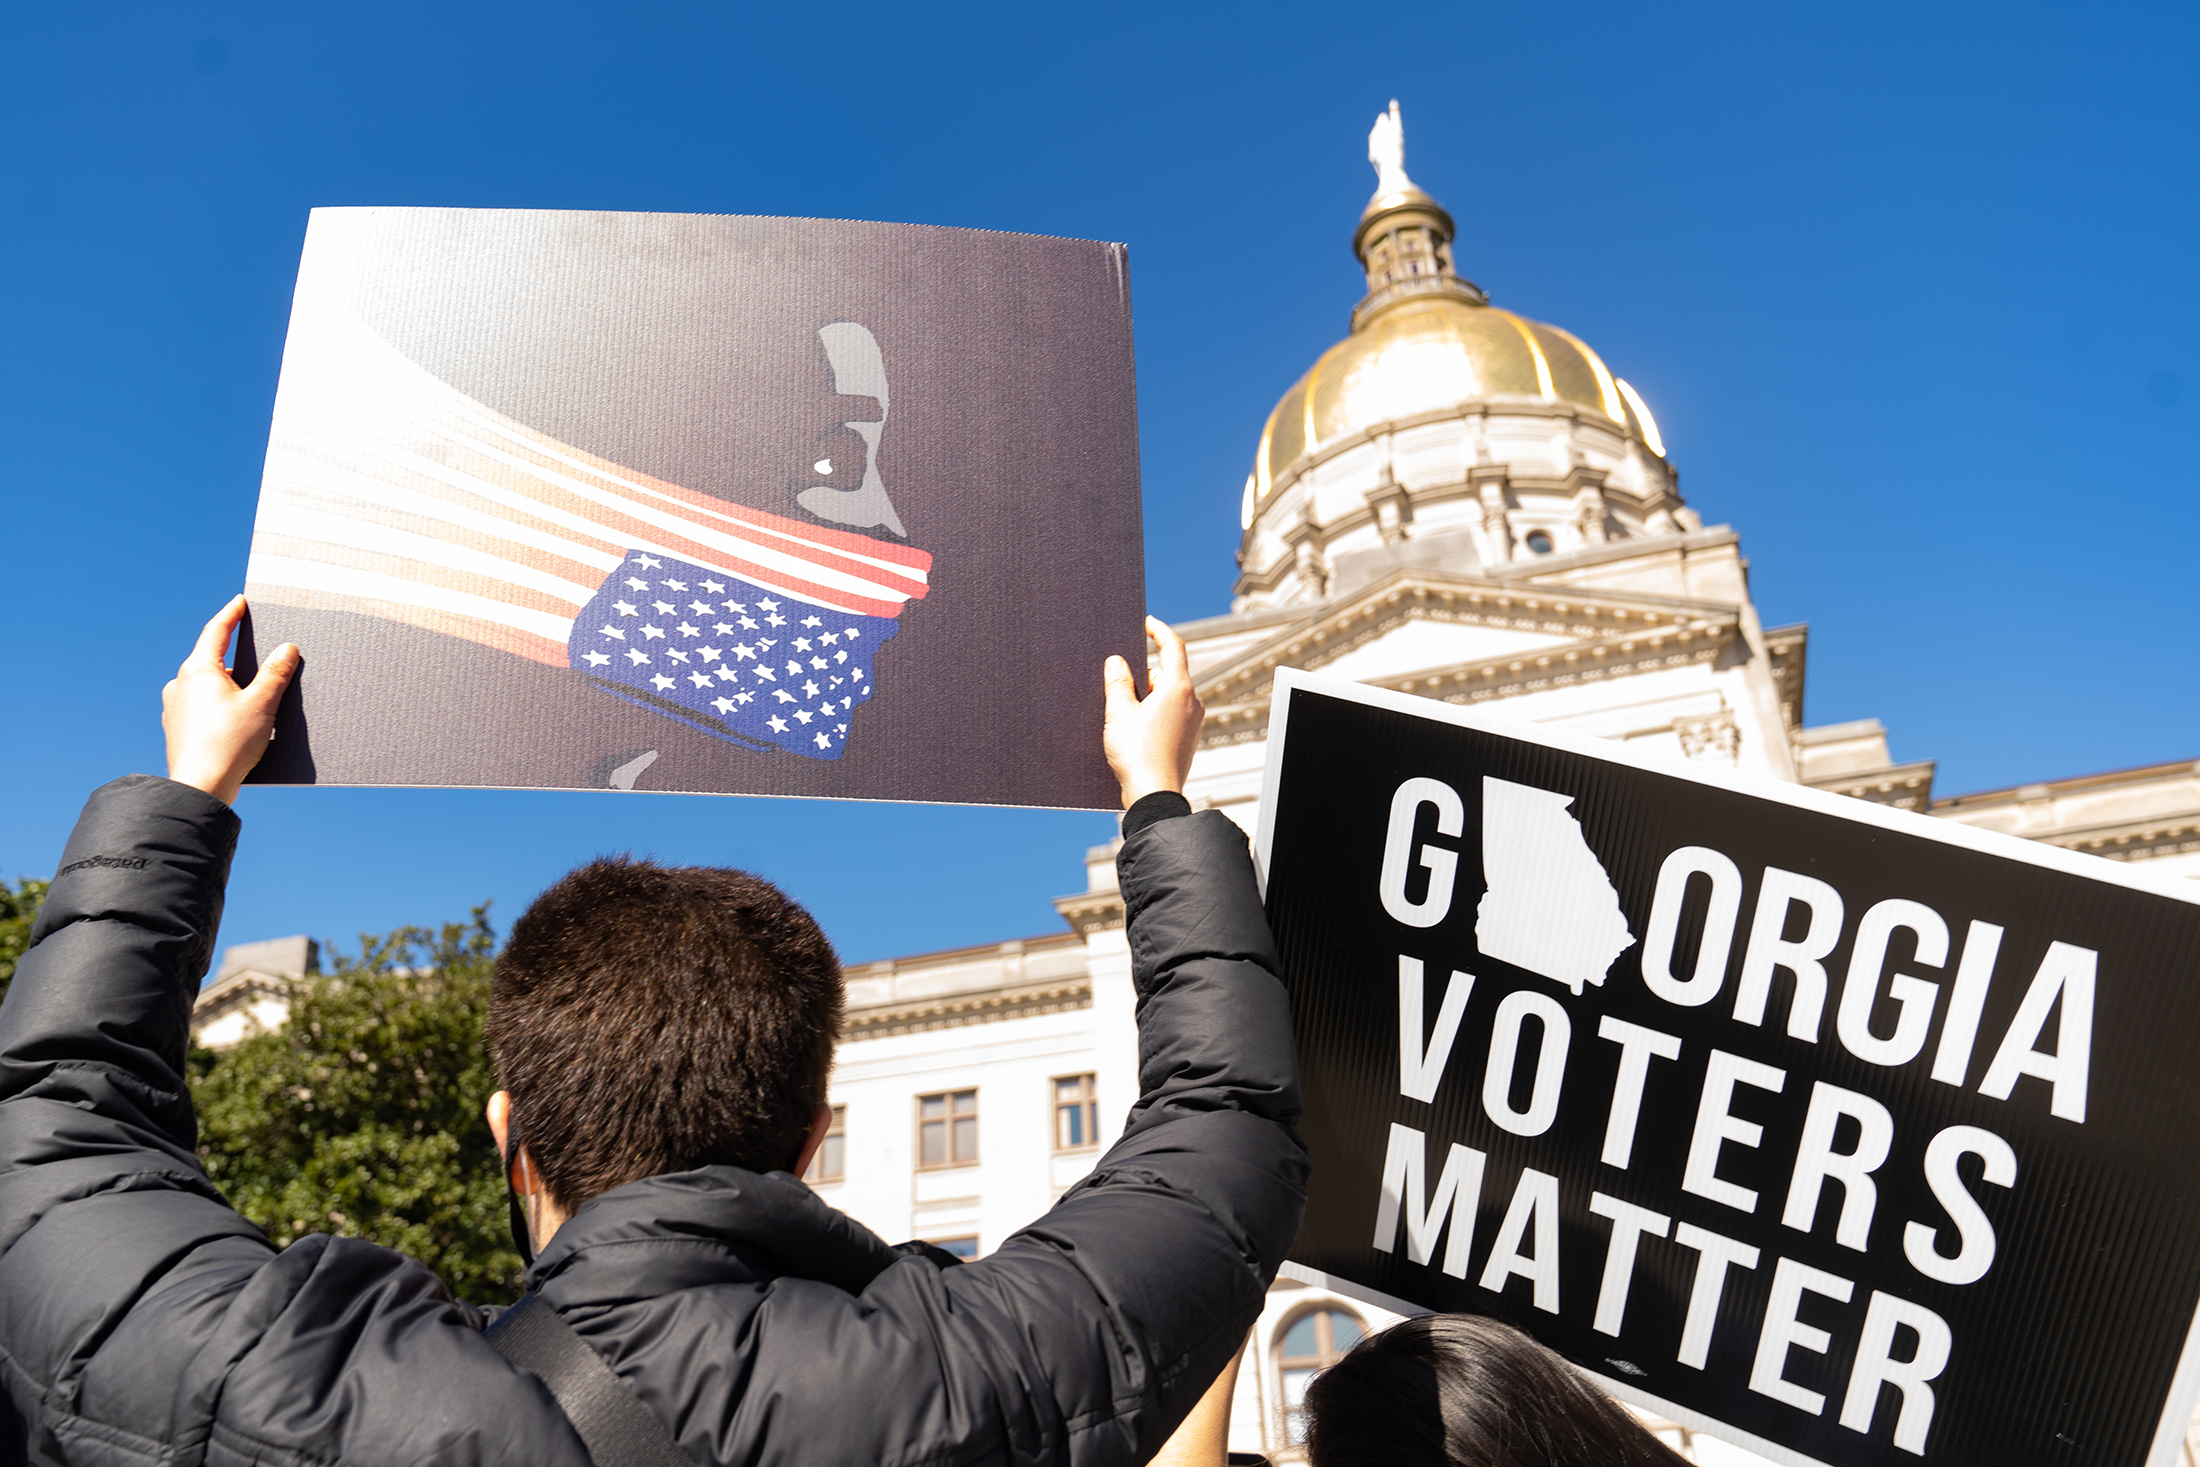 Demonstrators protest&nbsp;outside of the Georgia Capitol building&nbsp;to oppose a voting&nbsp;bill in Atlanta on March 3.